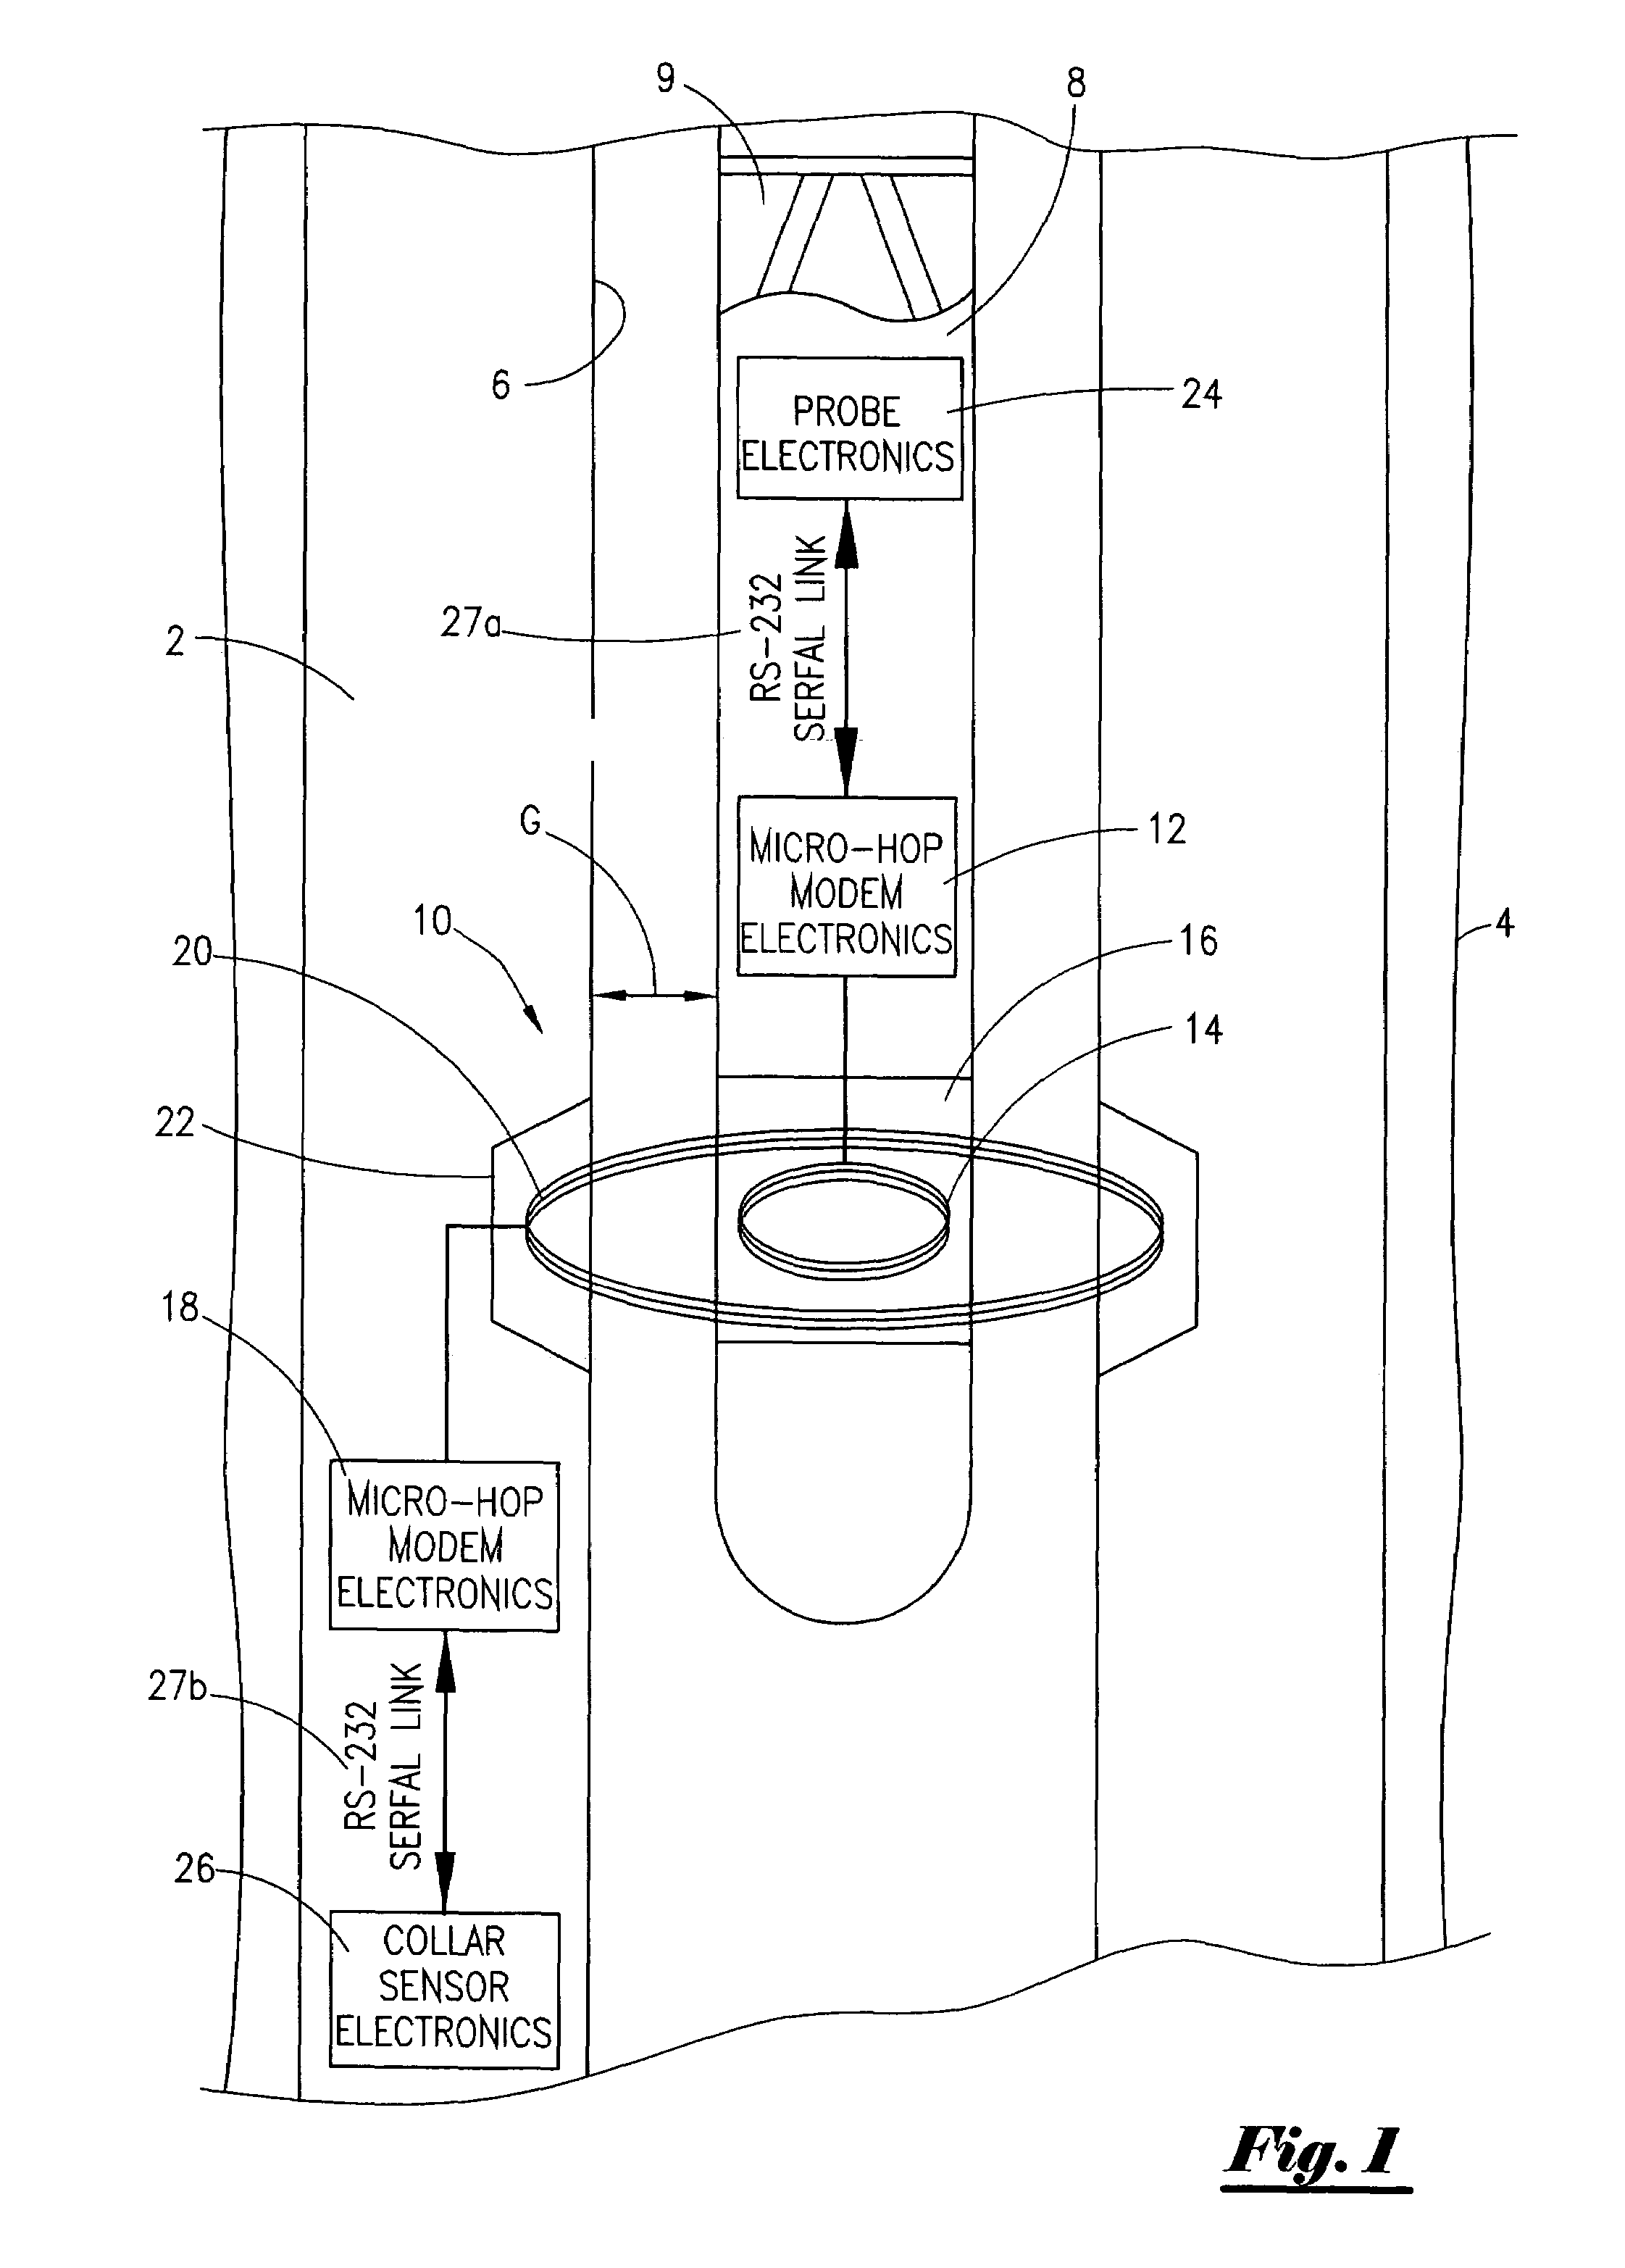 Apparatus and method for providing communication between a probe and a sensor